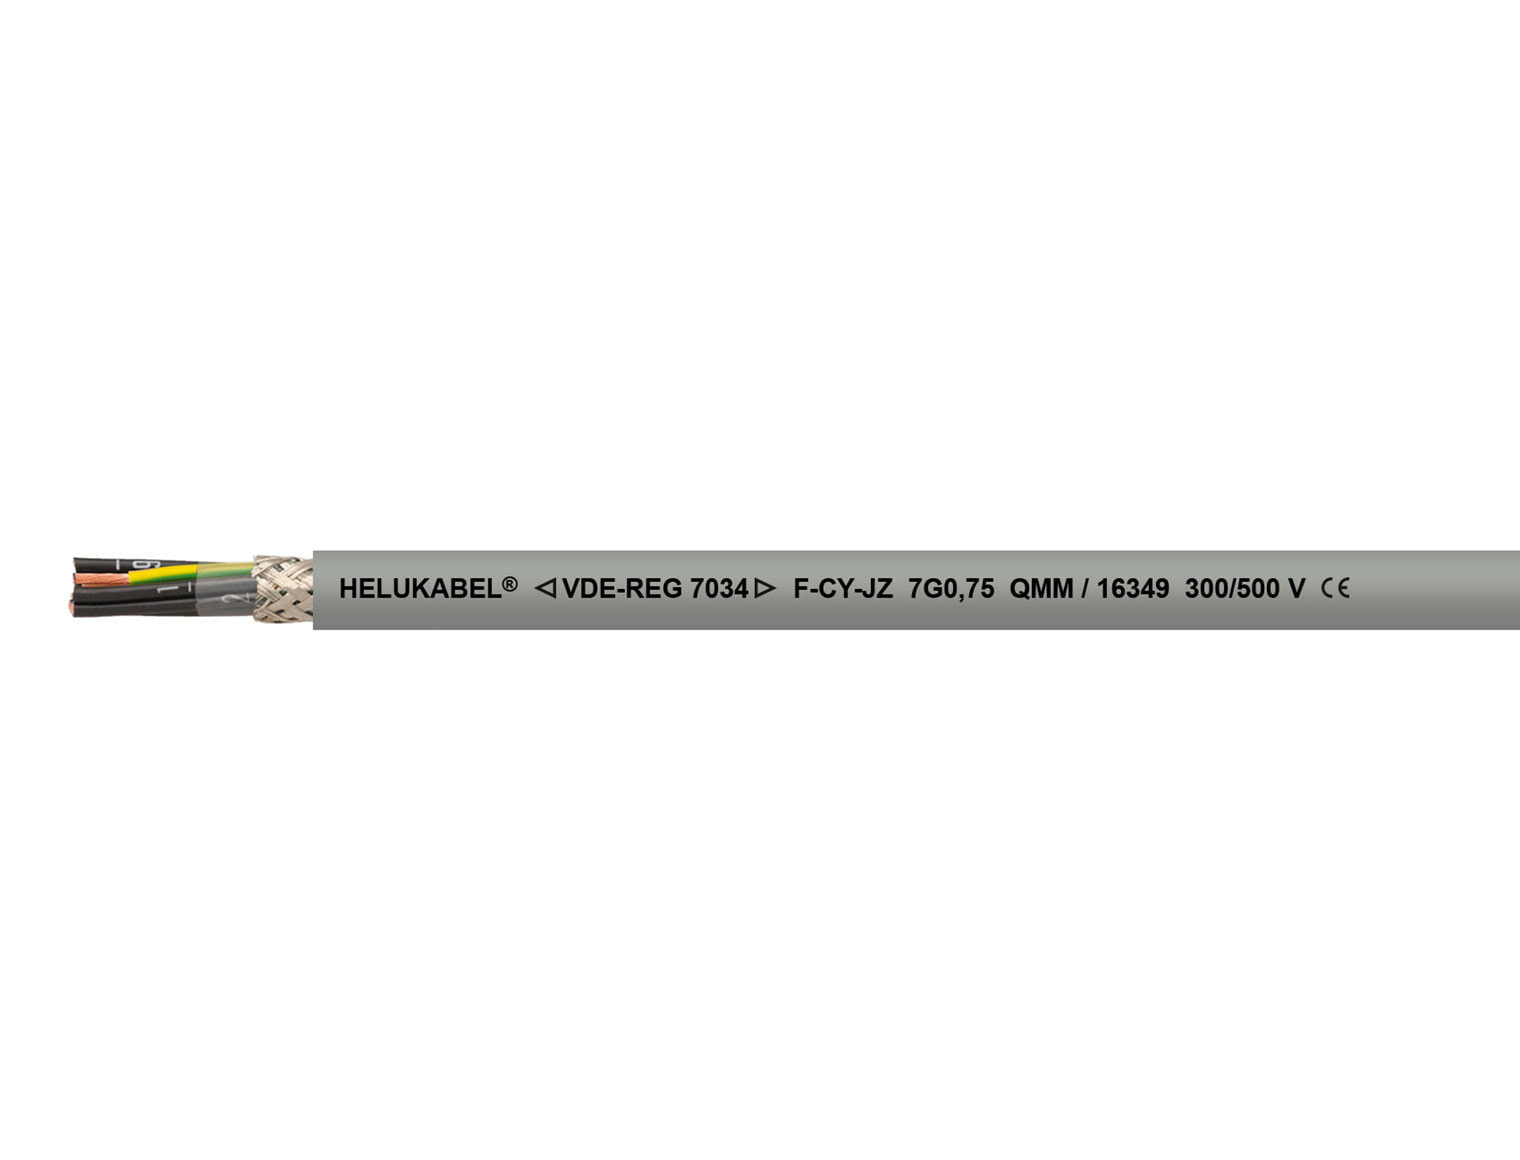 Helukabel HELU F-CY-JZ 5G1.5 16396 - Low voltage cable - Grey - Polyvinyl chloride (PVC) - Polyvinyl chloride (PVC) - Cooper - -10 - 80 °C